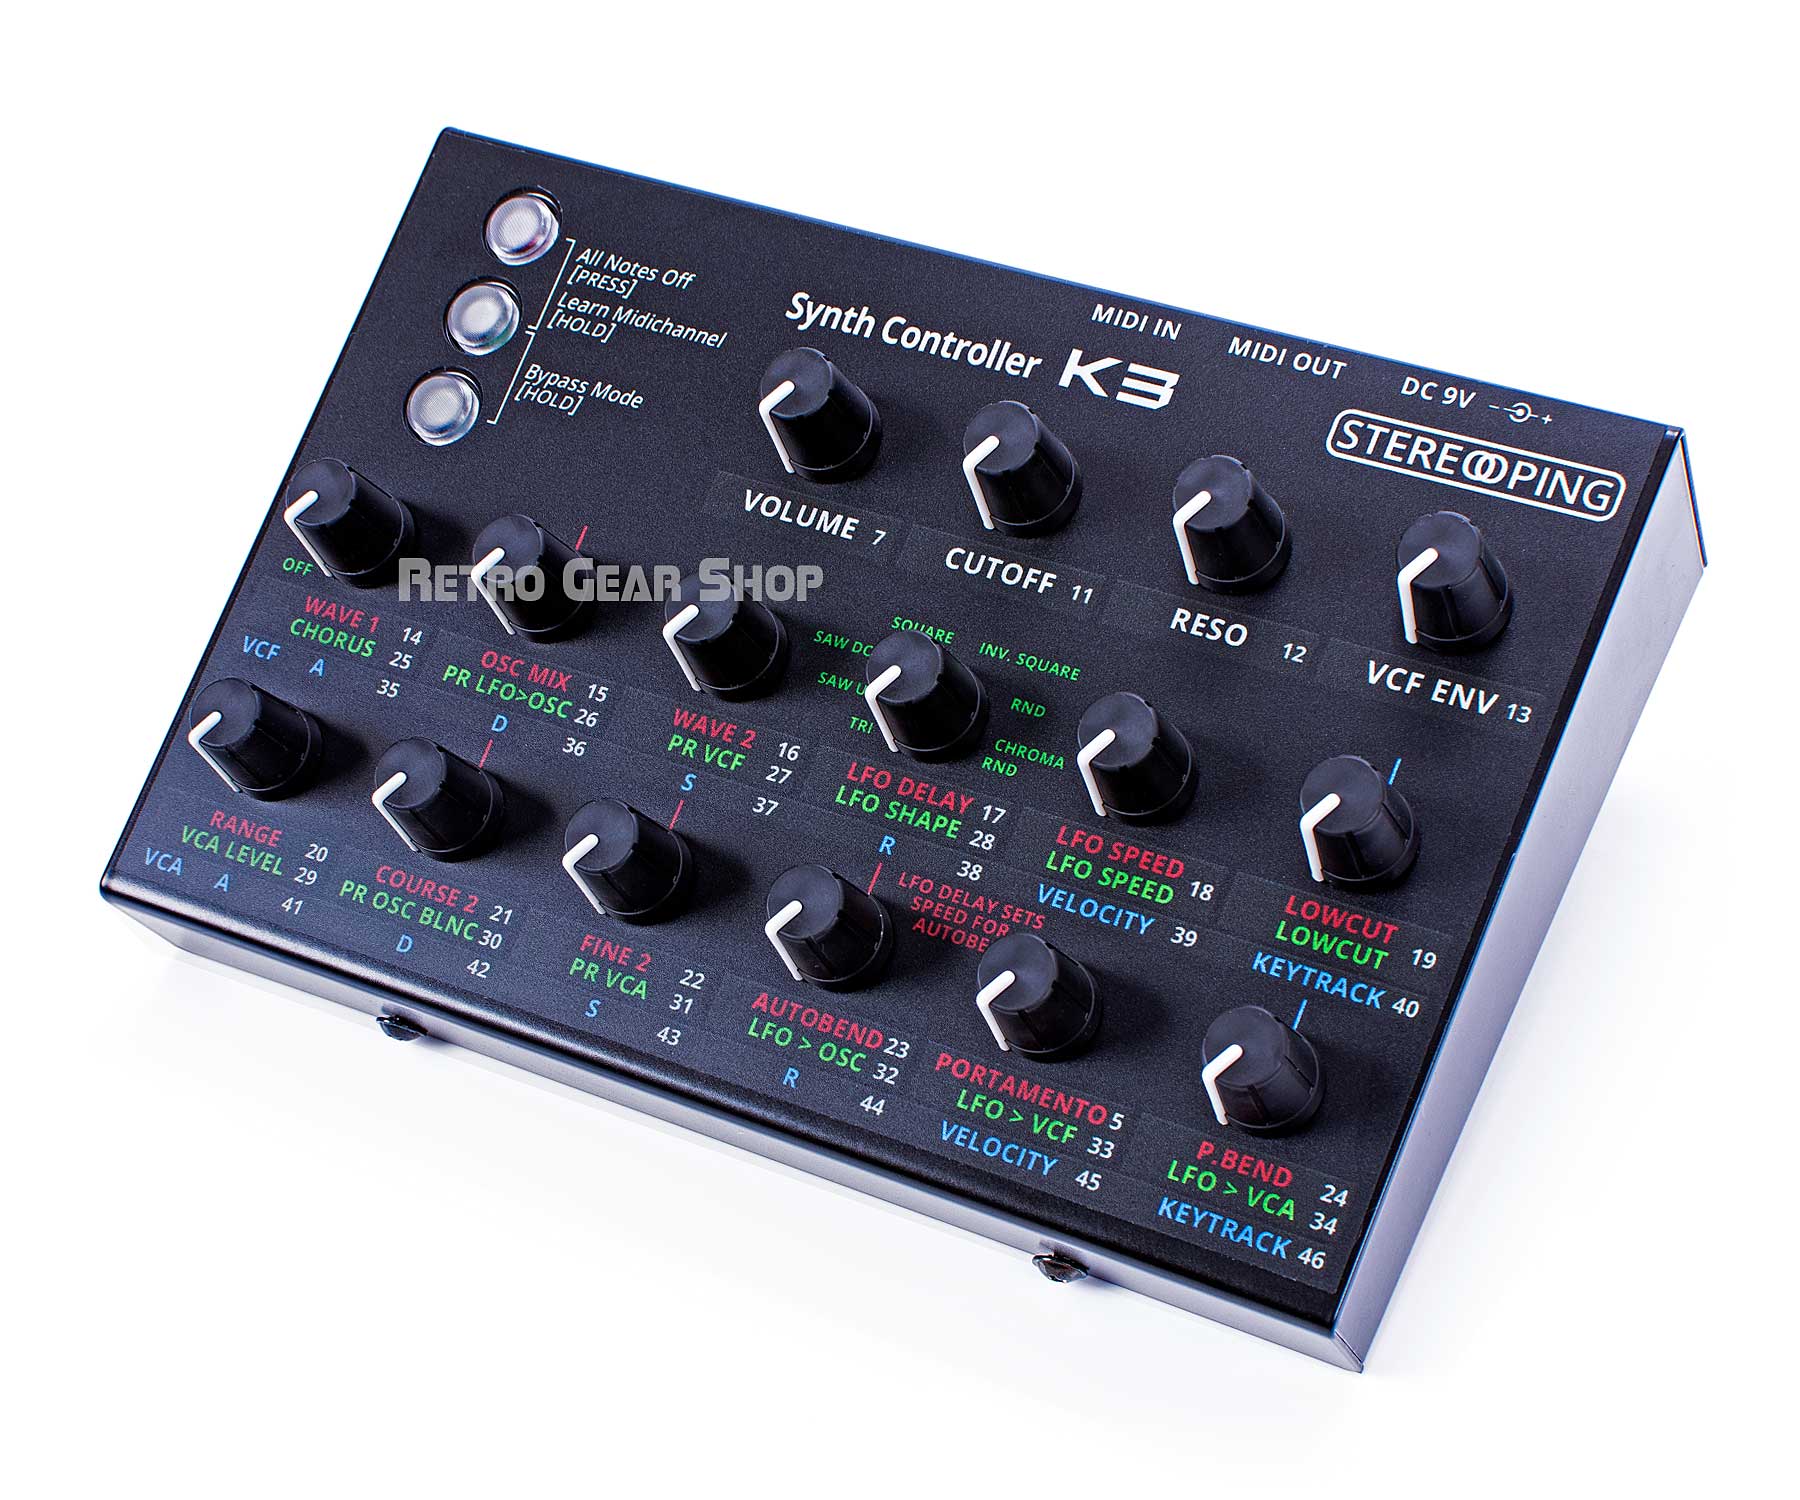 Stereoping CE-1 K3 Midi Controller for Kawai K3 Knobs